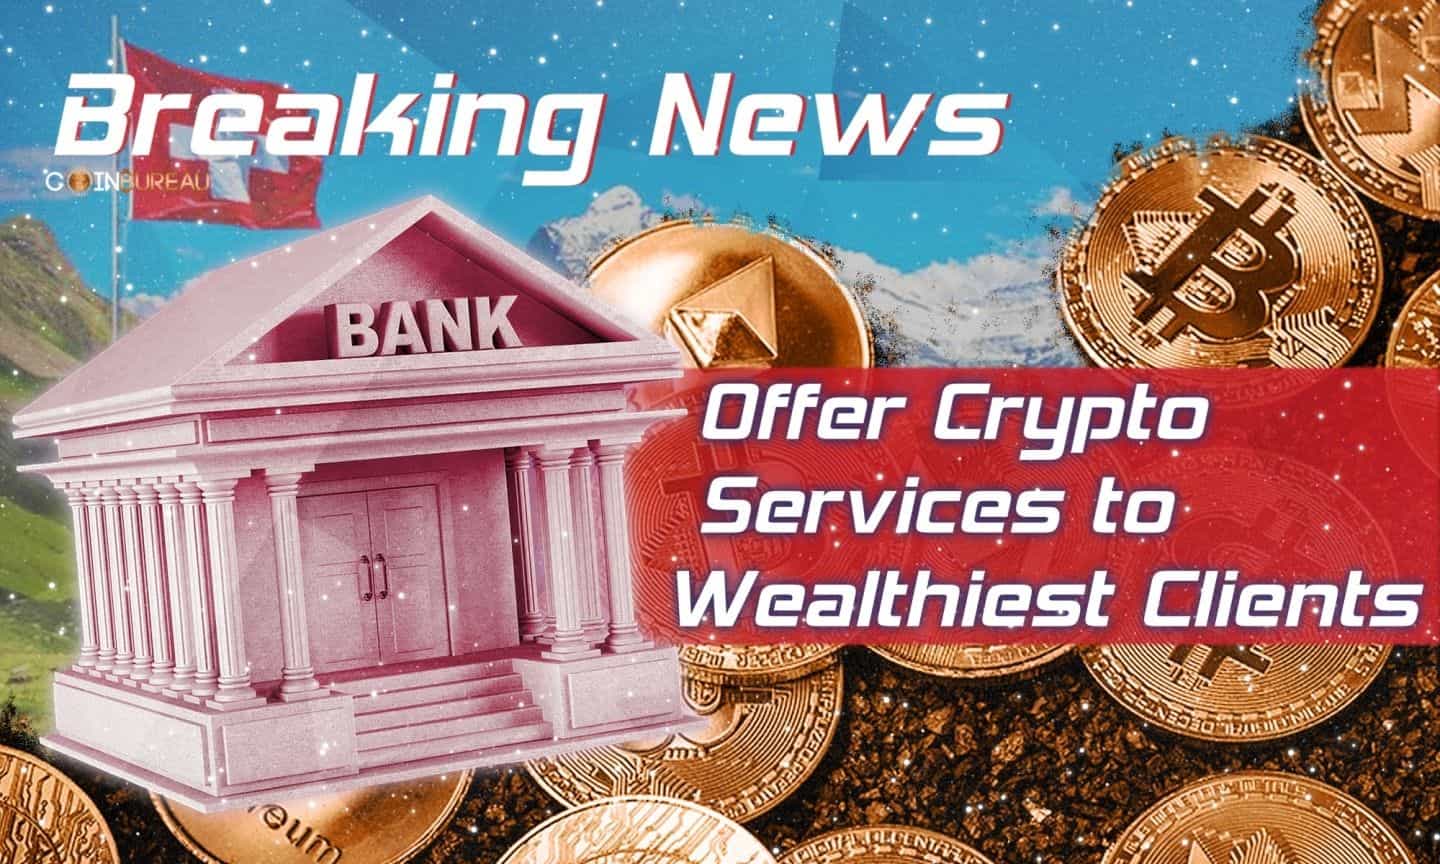 Swiss Bank to Offer Crypto Services to Wealthiest Clients